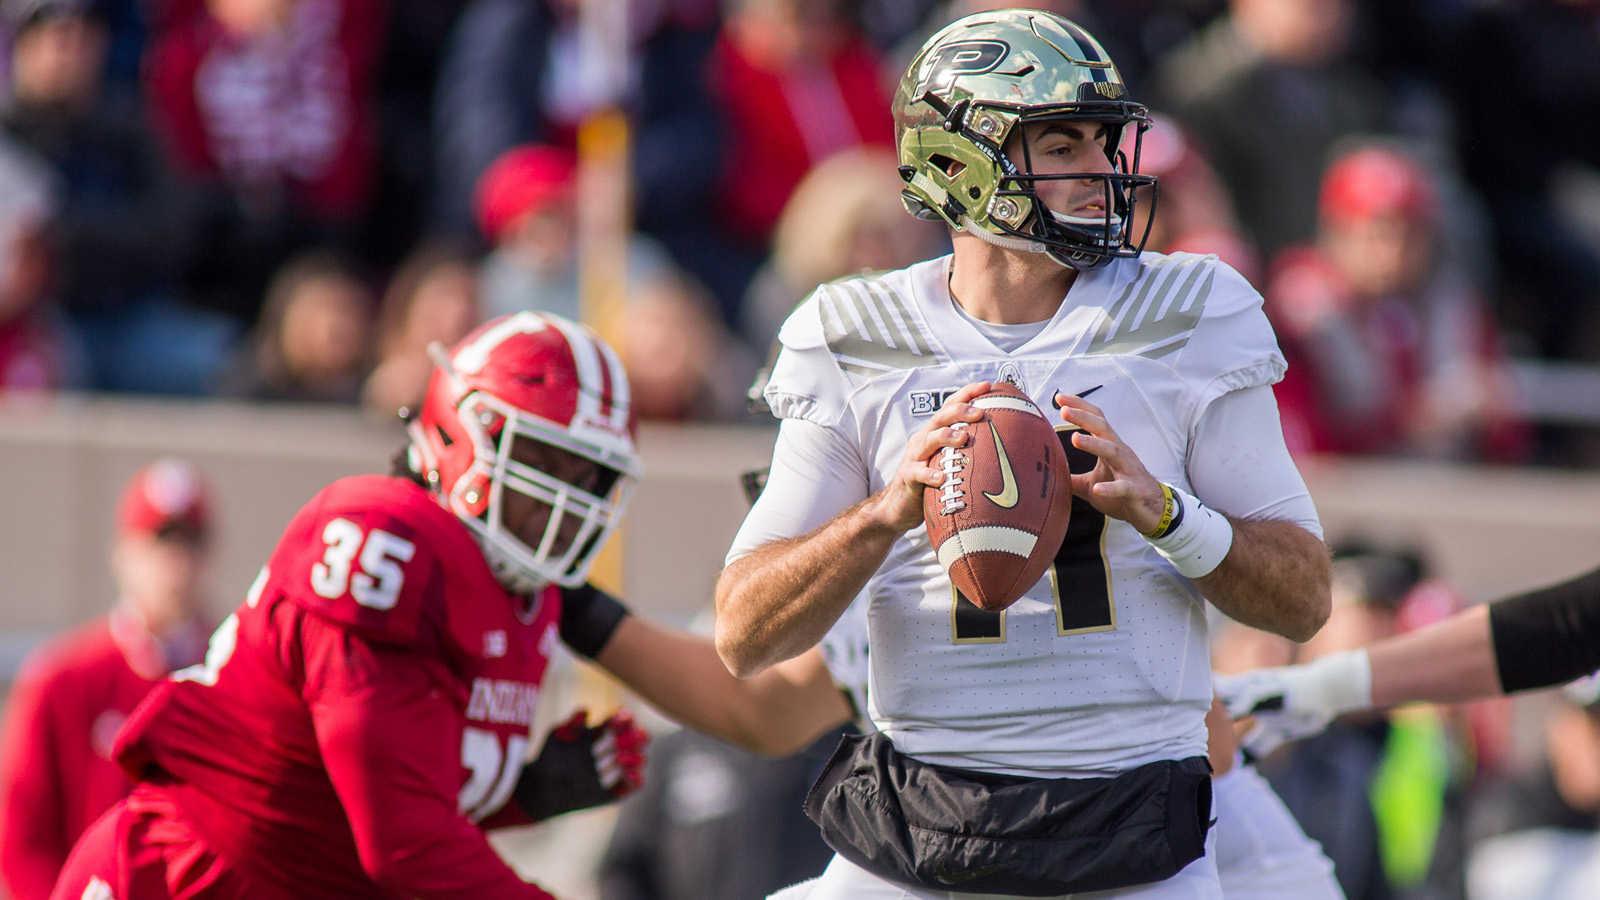 Purdue earns Bucket, bowl eligibility with 28-21 win over Indiana